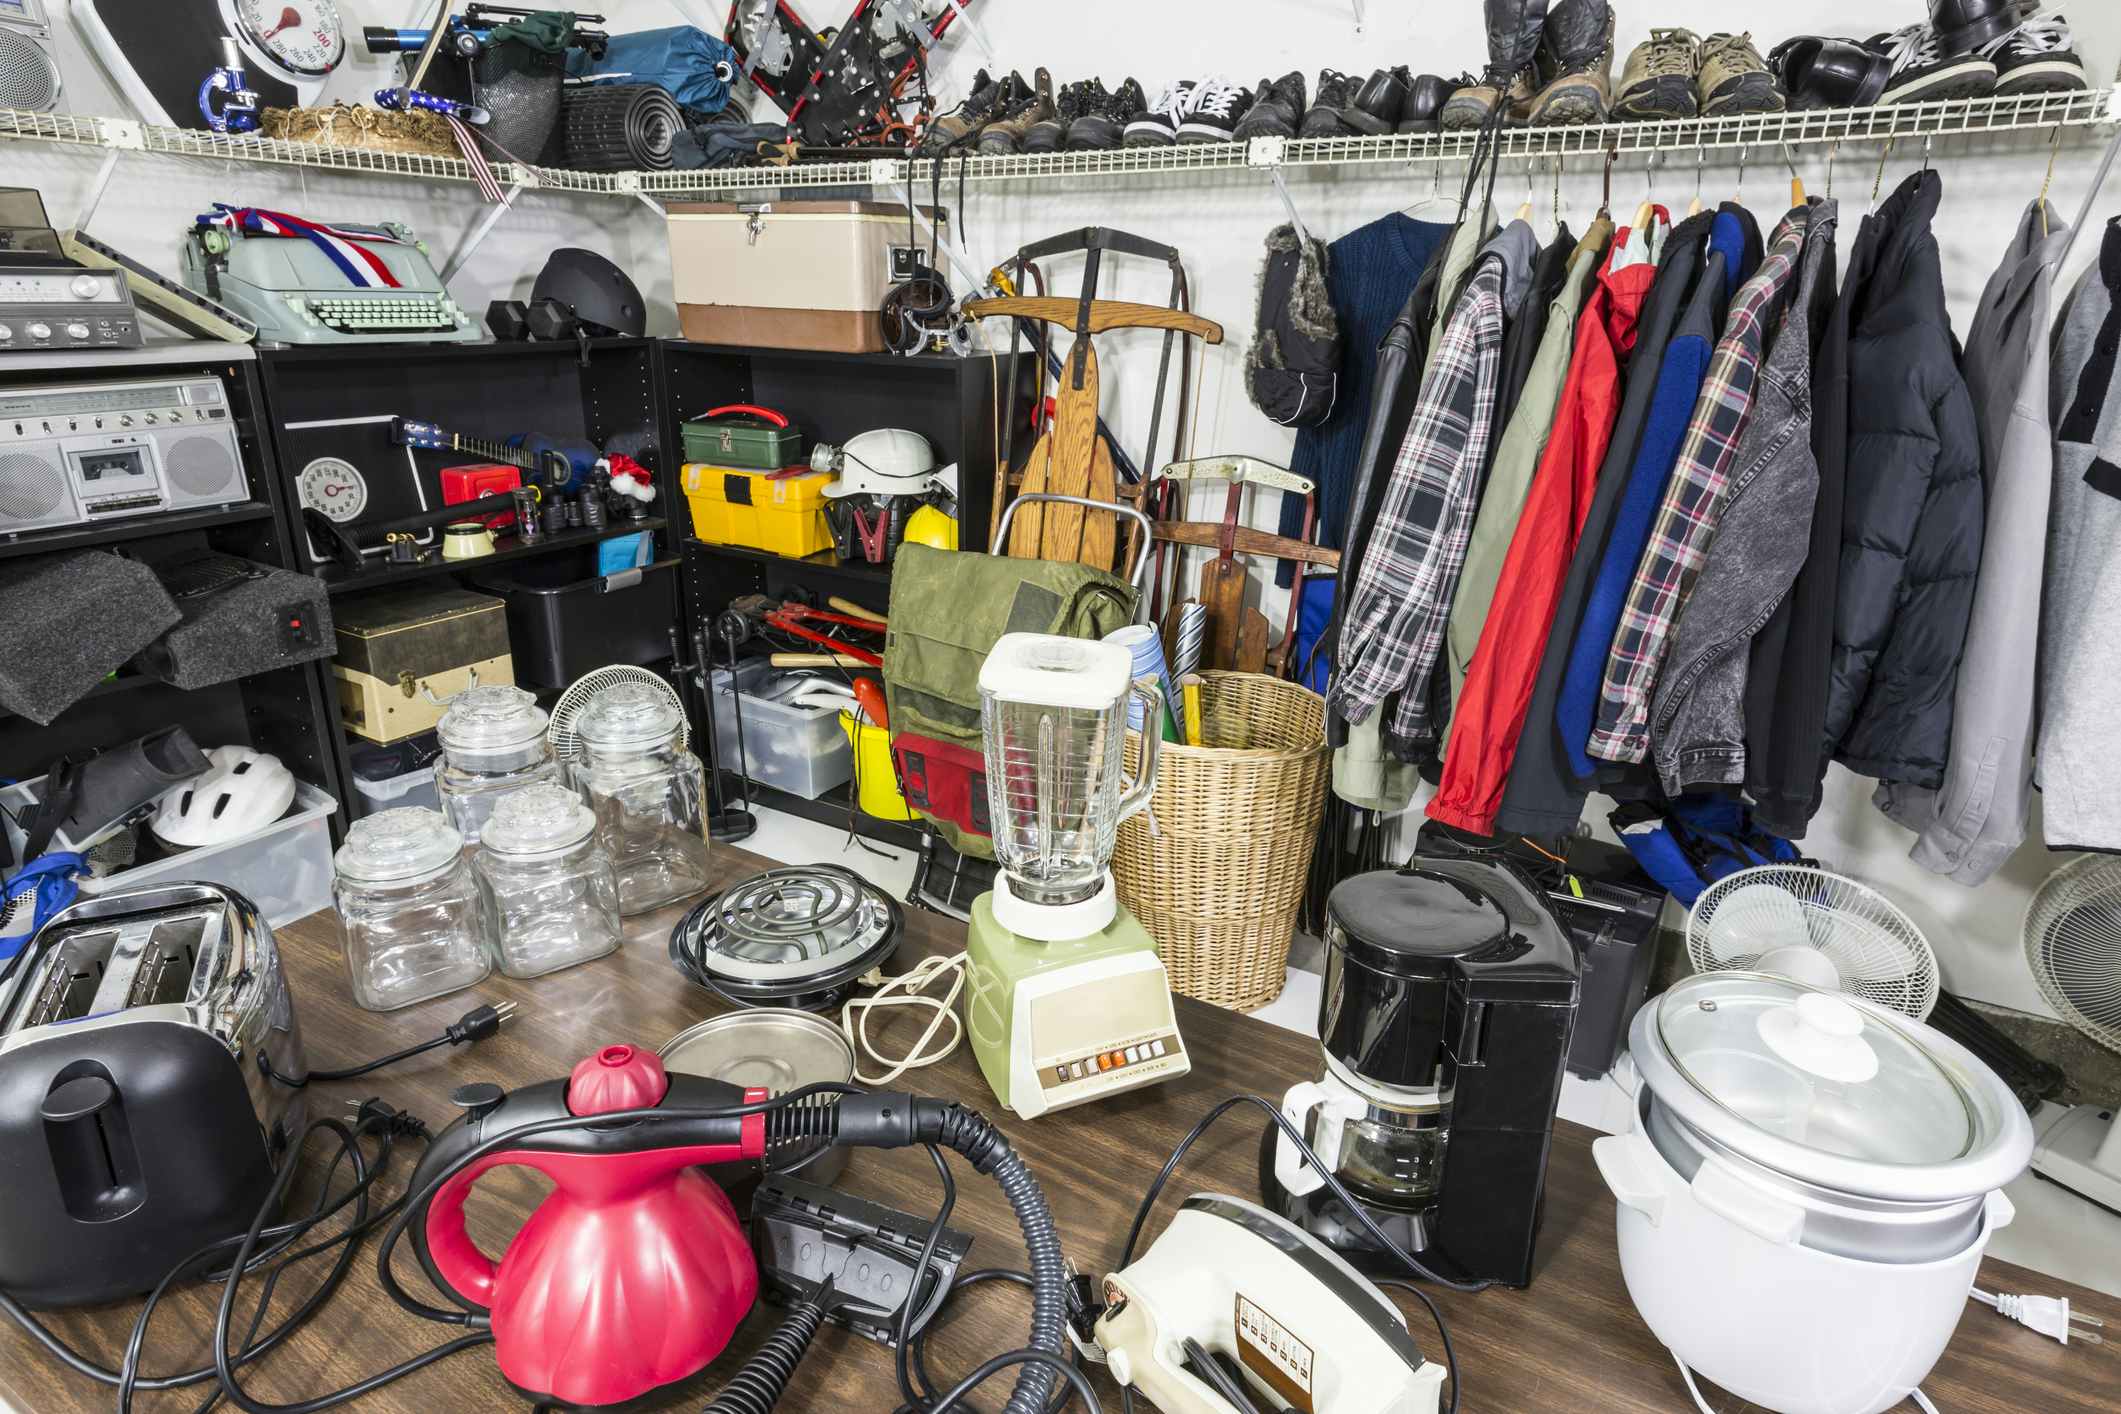 Interior garage sale, housewares, clothing, sporting goods and toys.